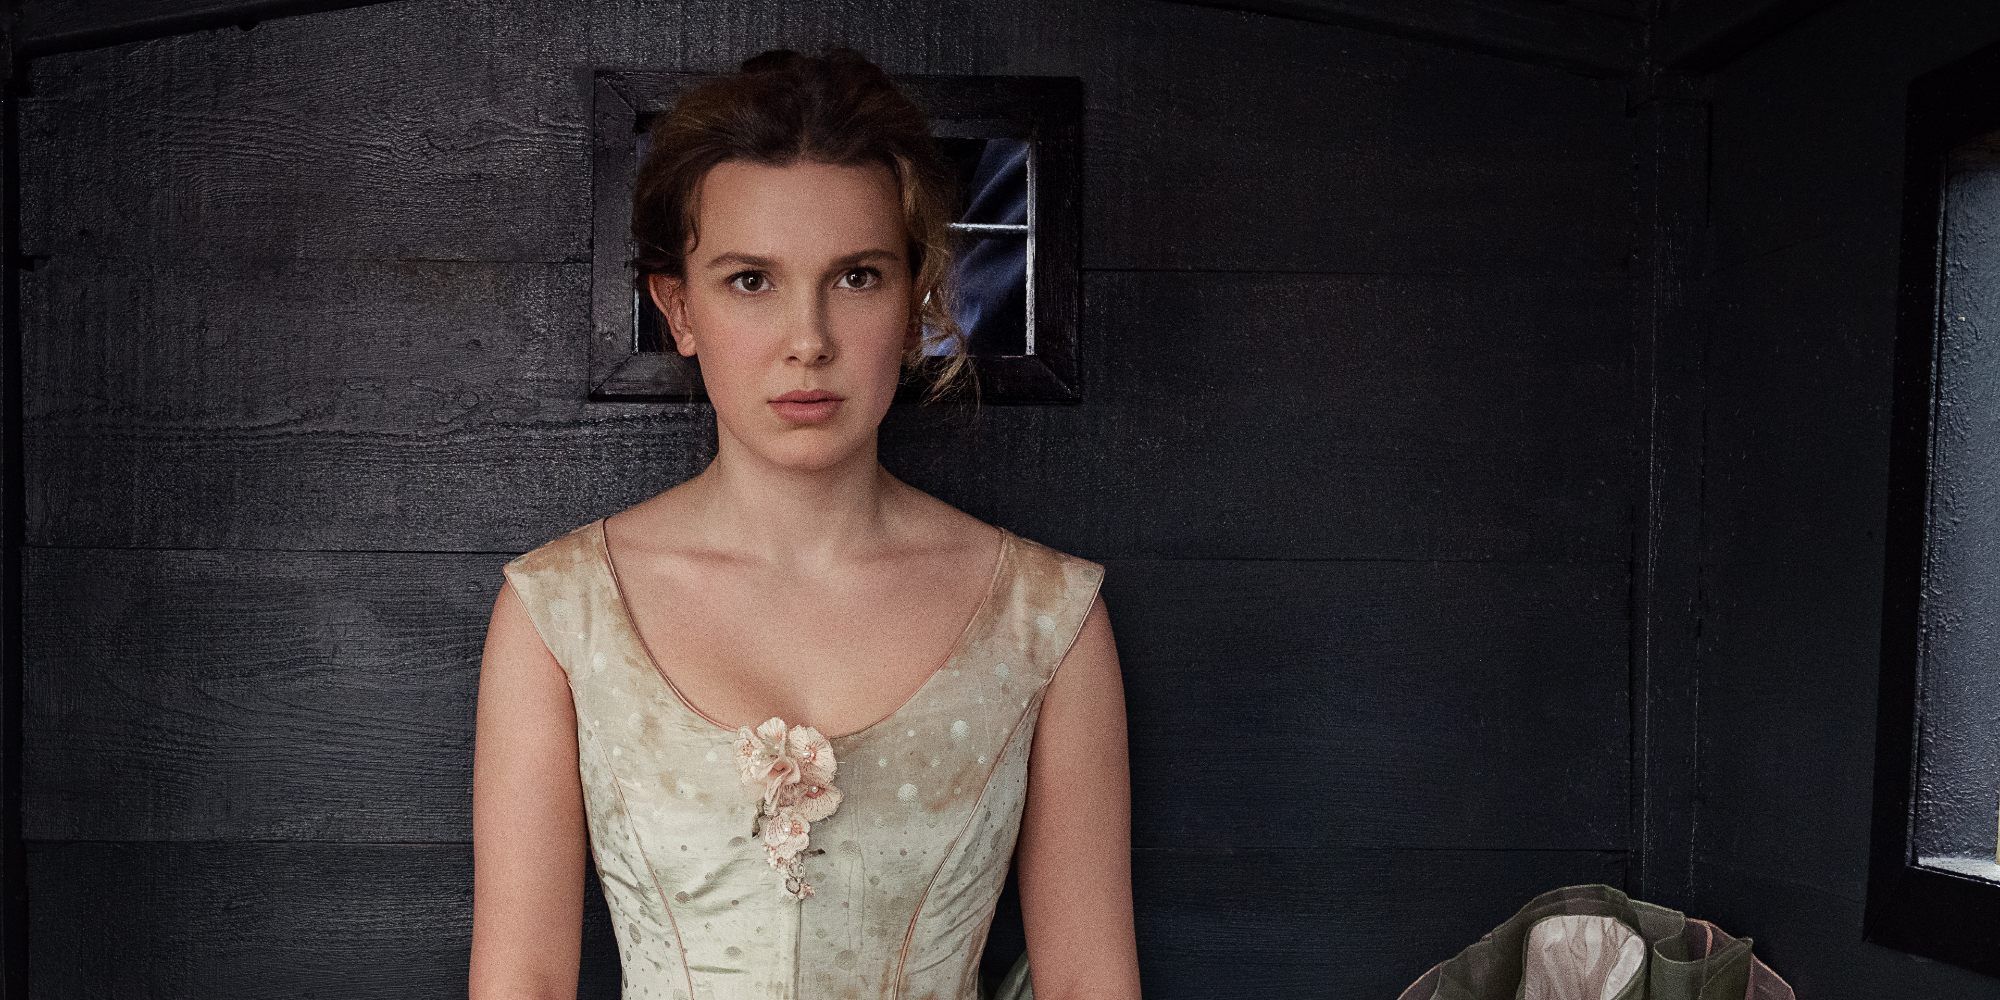 Millie Bobby Brown as Enola Holmes sits in a carriage in Enola Holmes 2